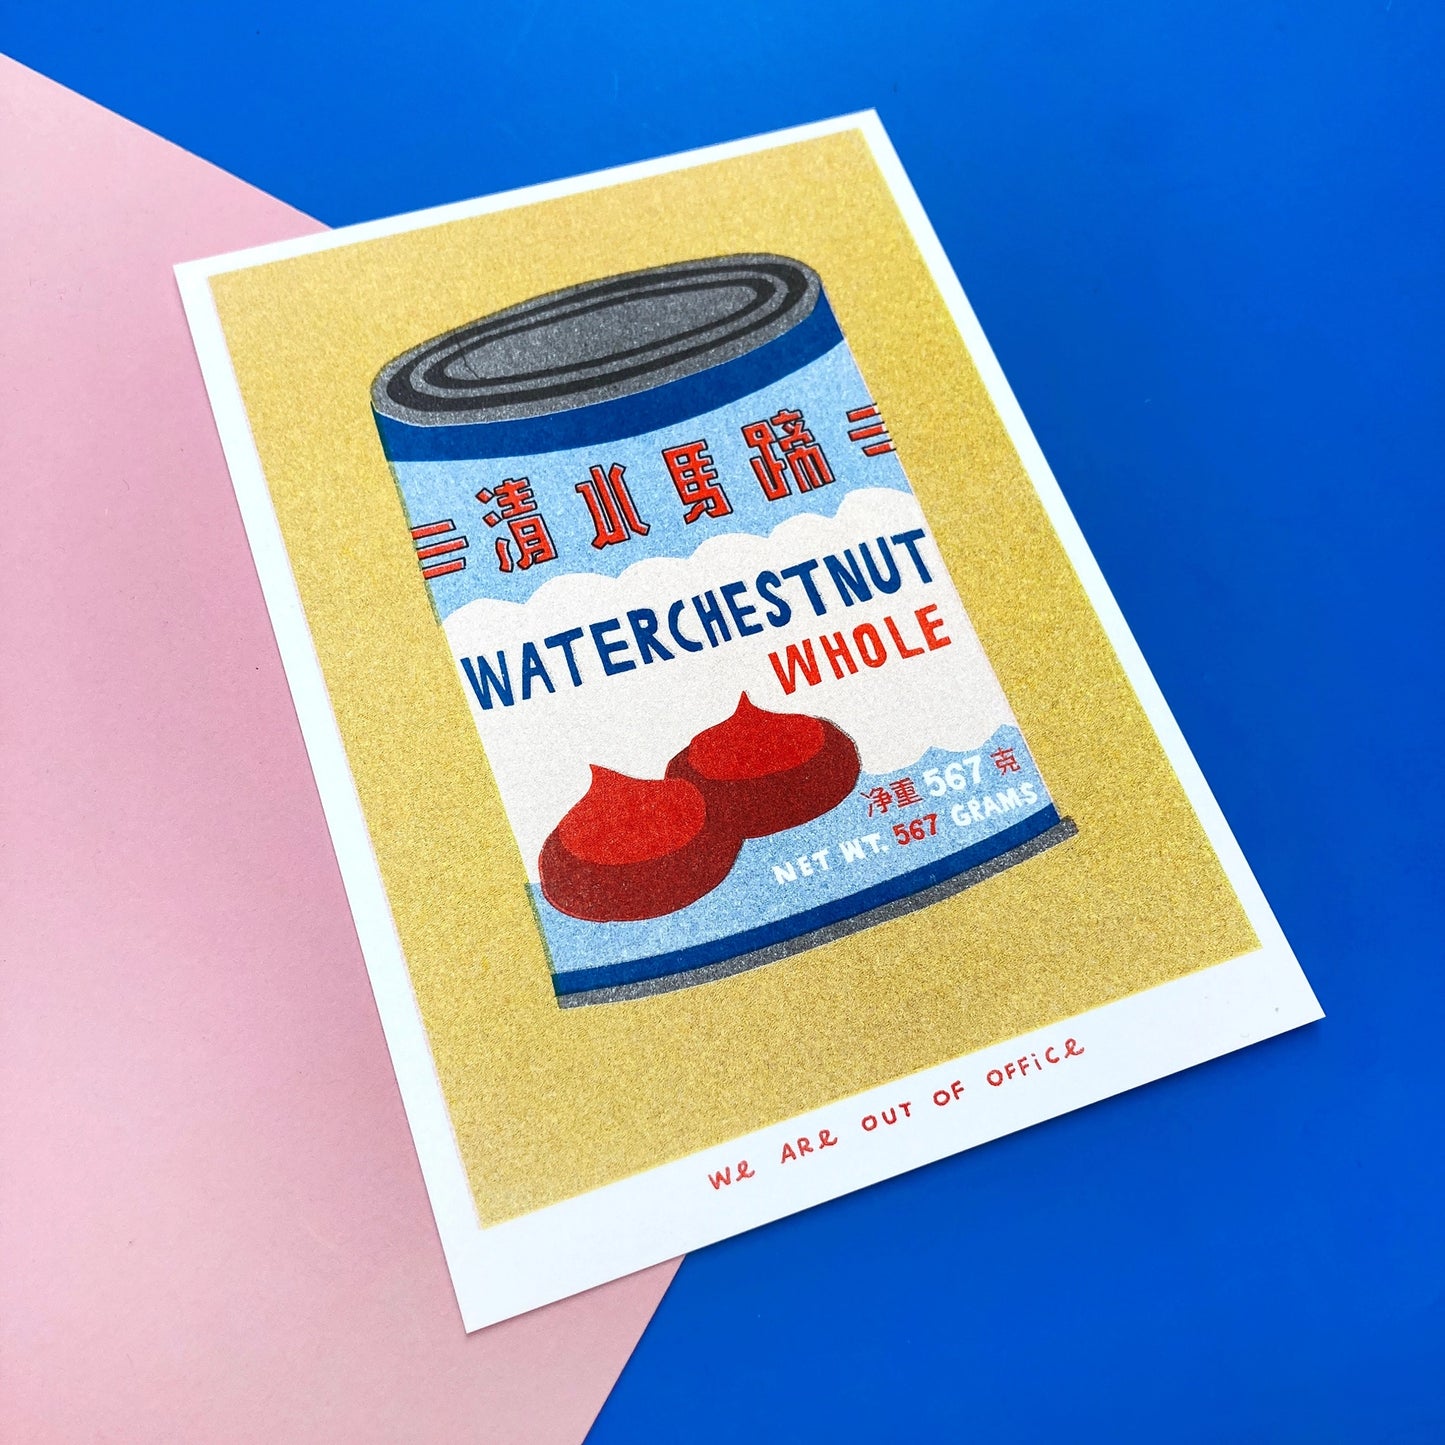 A Risograph Print of Can Water Chestnuts